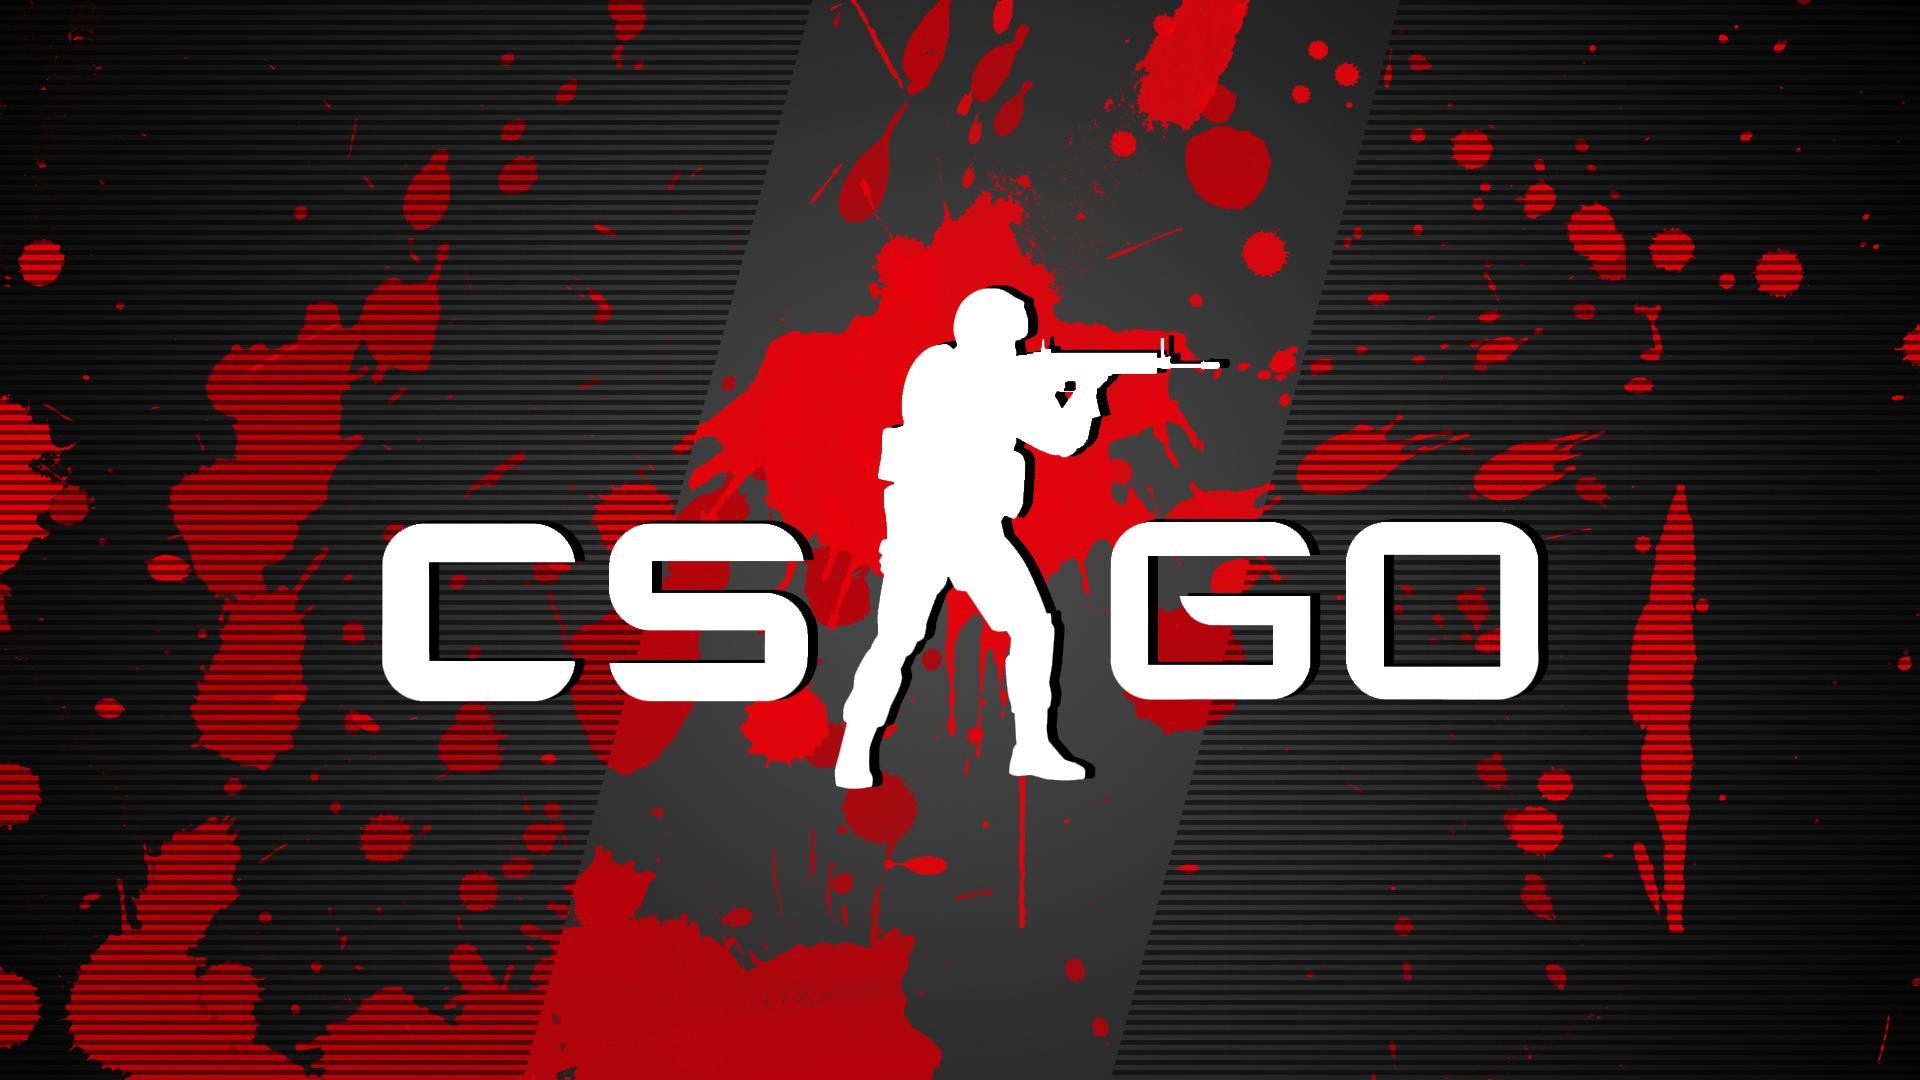 4571547 jumping, e-sports, Counter-Strike: Global Offensive, PC gaming,  Counter-Strike, silhouette - Rare Gallery HD Wallpapers